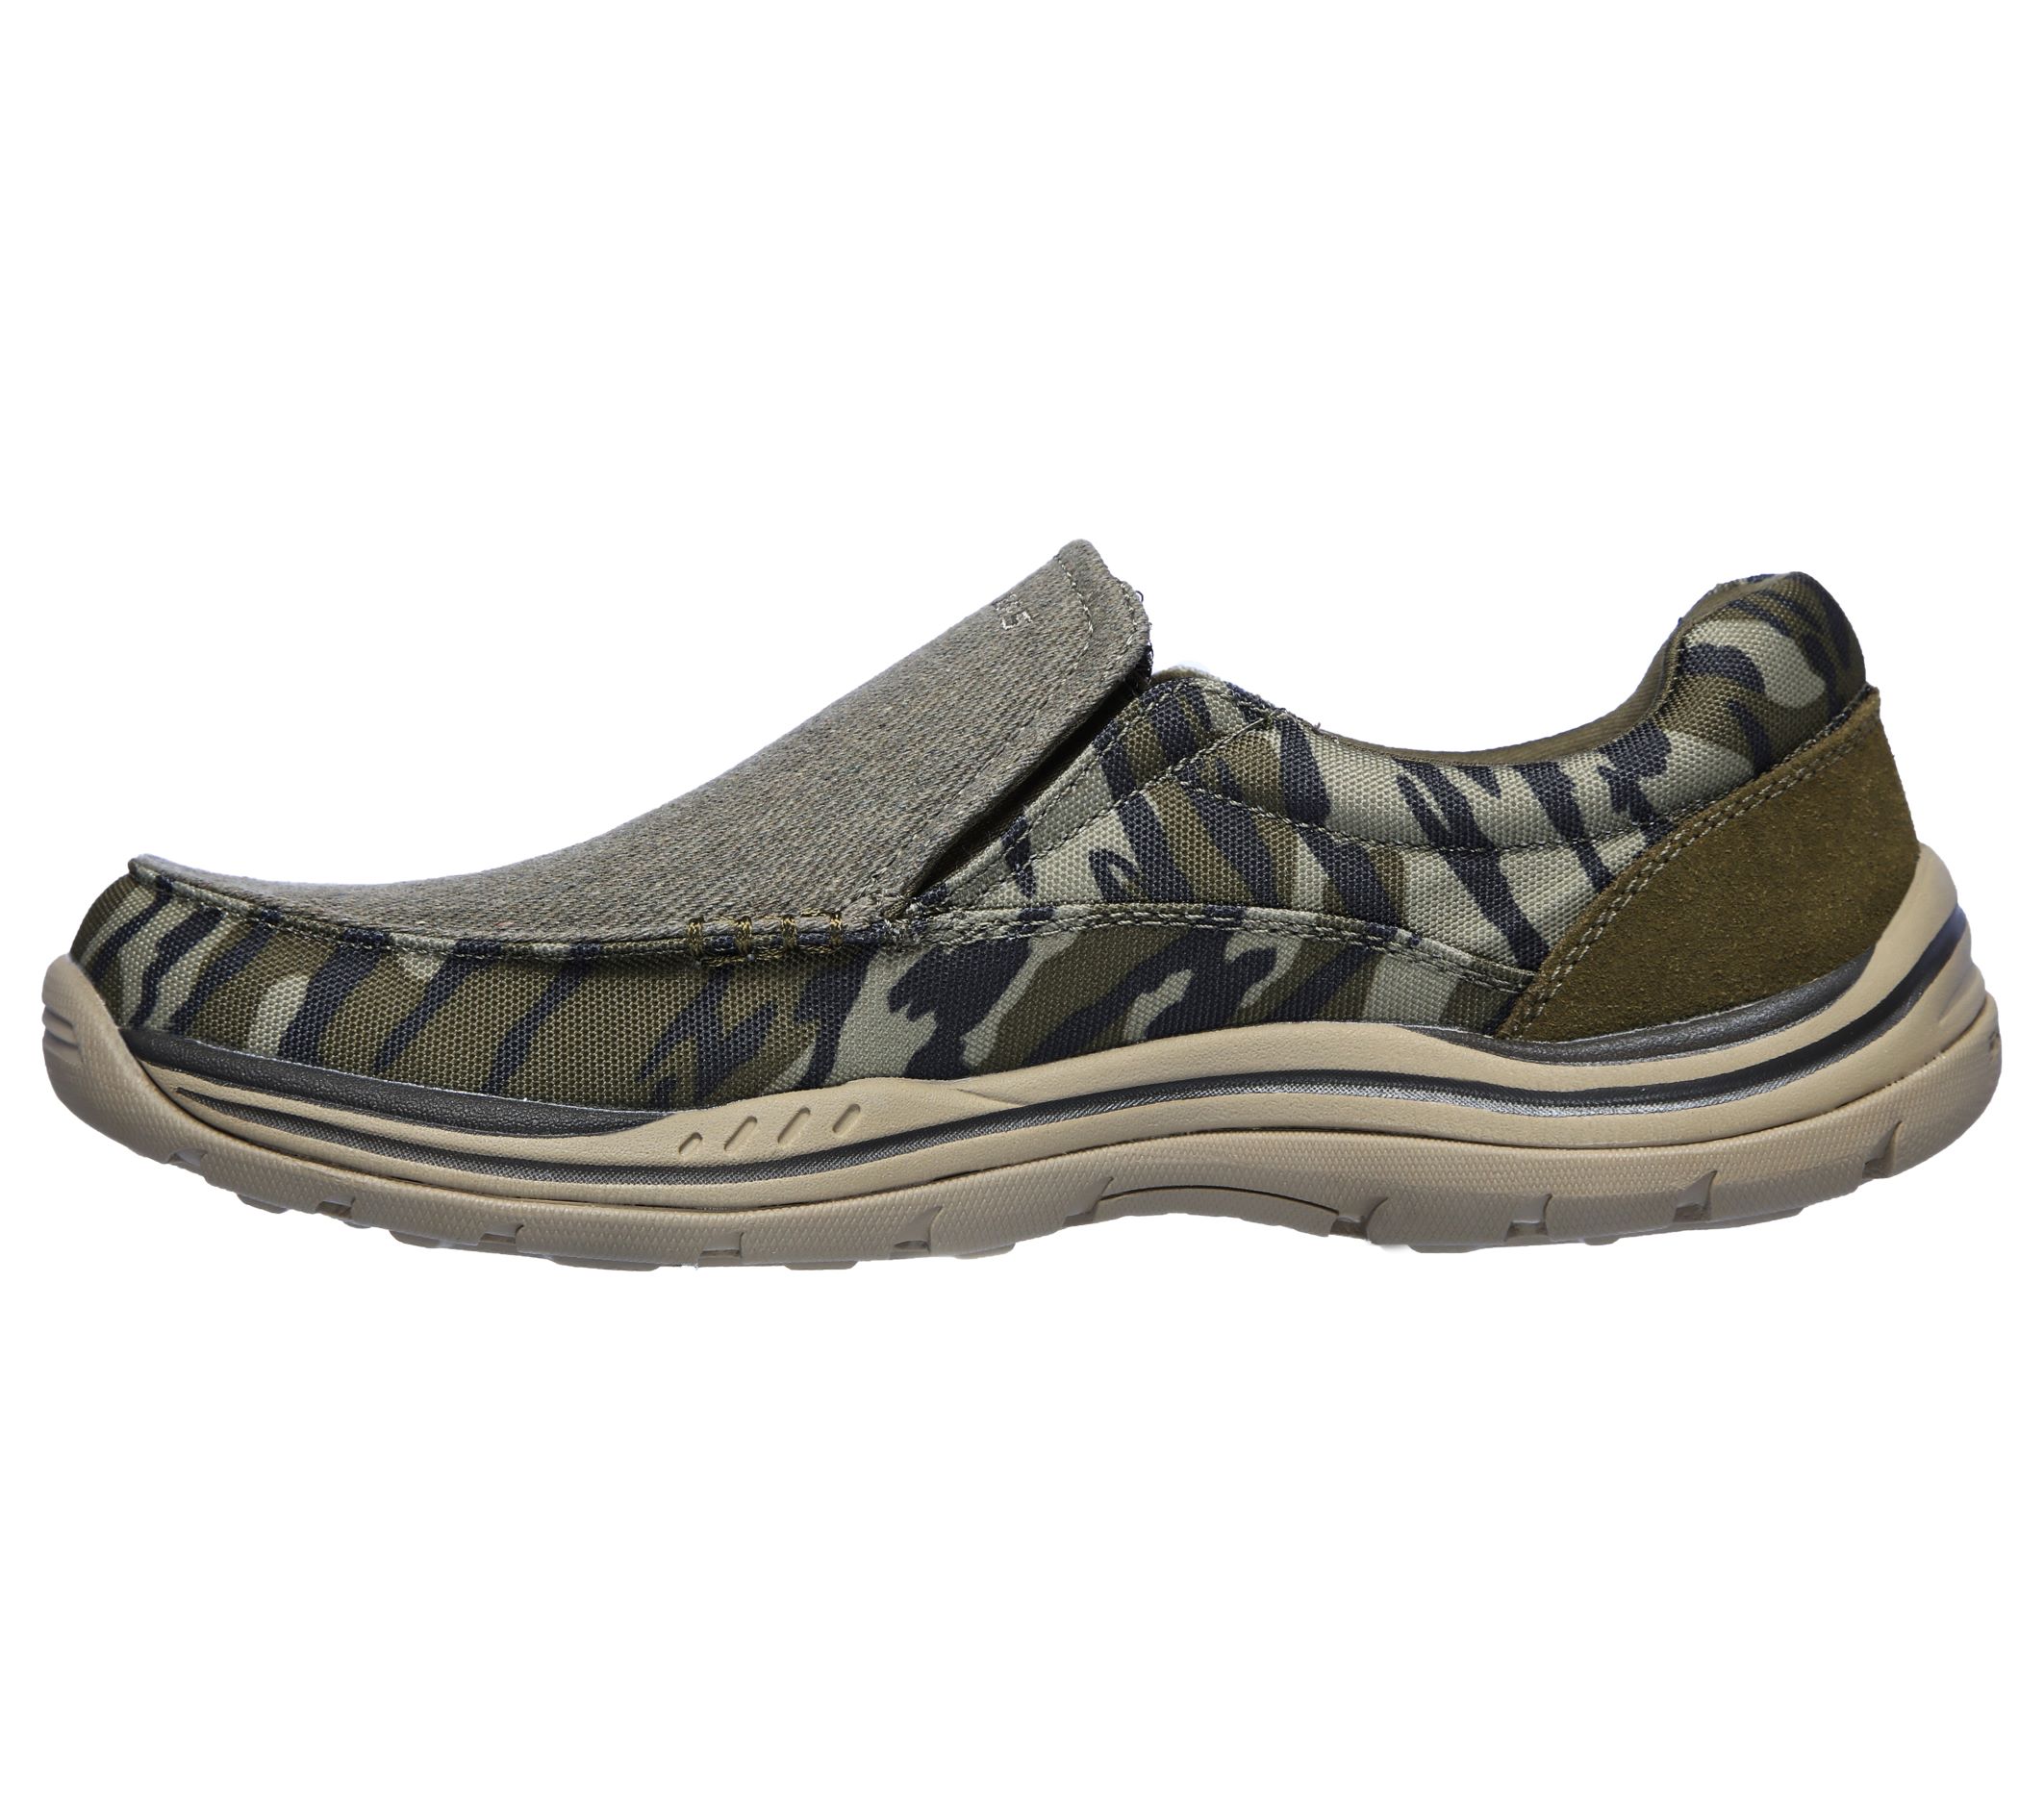 Skechers Men's Relaxed Fit Expected Avillo Casual Slip-on Shoe (Wide Width Available) - image 2 of 5